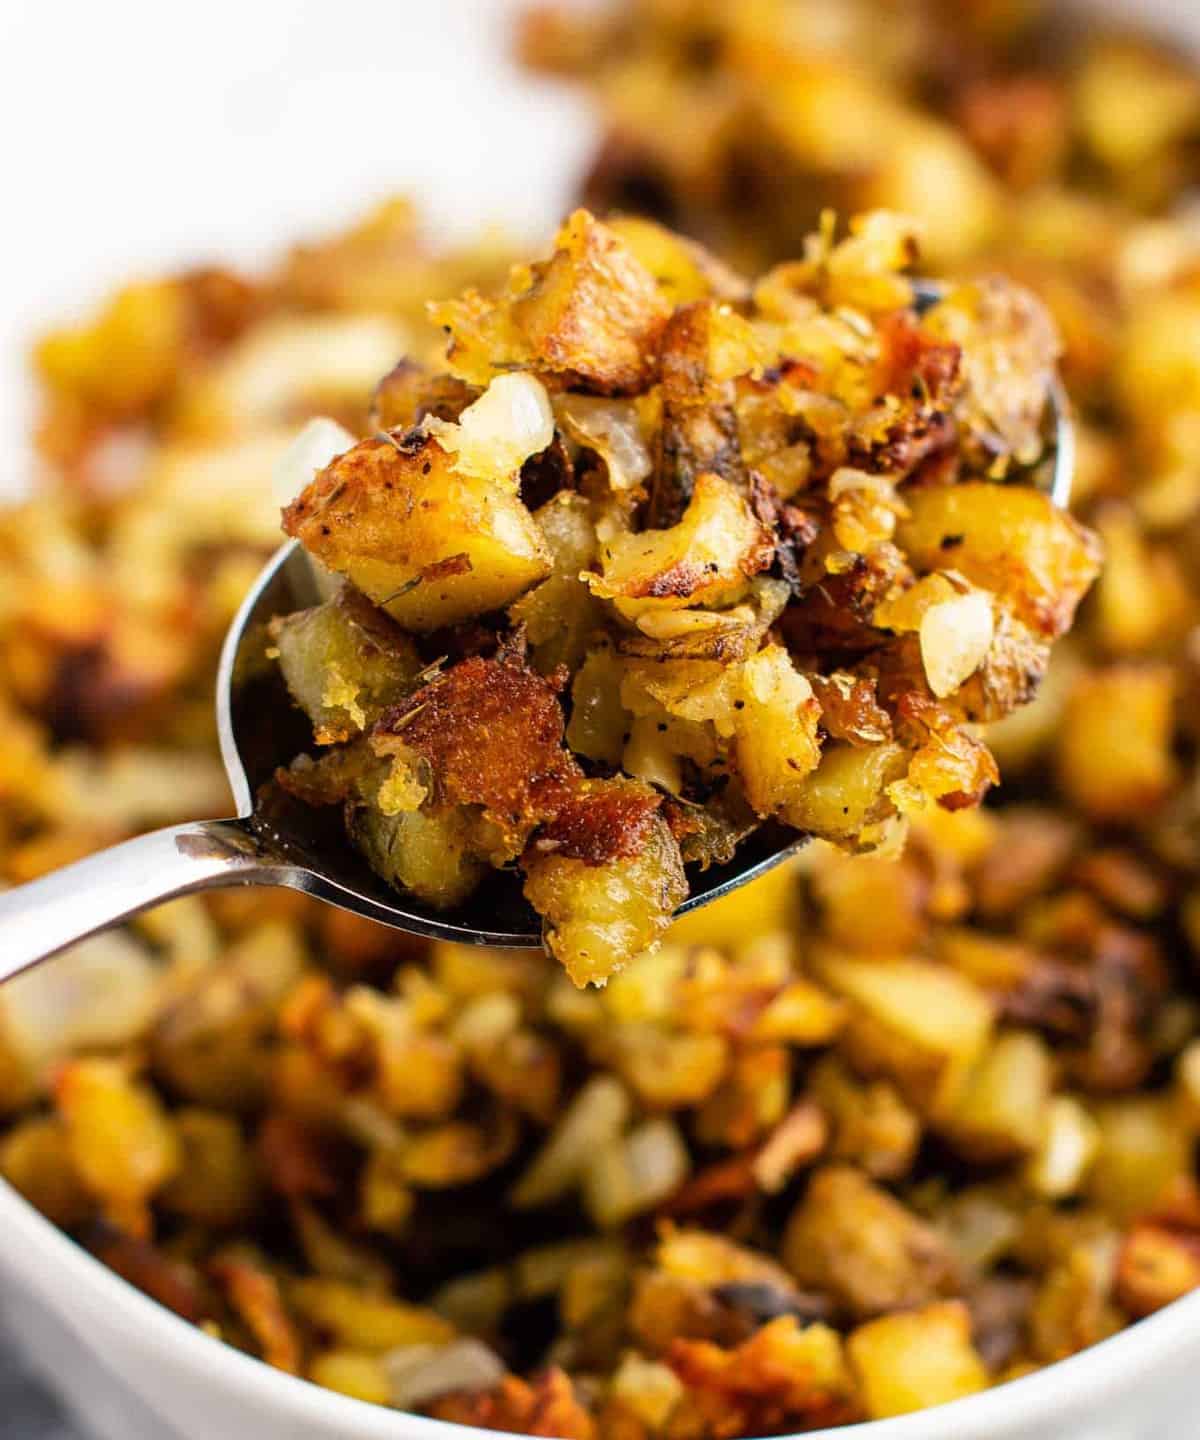 This famous crispy potato casserole is SO GOOD! Perfectly crispy potatoes slow roasted to perfection. One of the best vegan potato recipes! #potatocasserole #vegan #veganpotatorecipes #dinner #potatoes #healthy